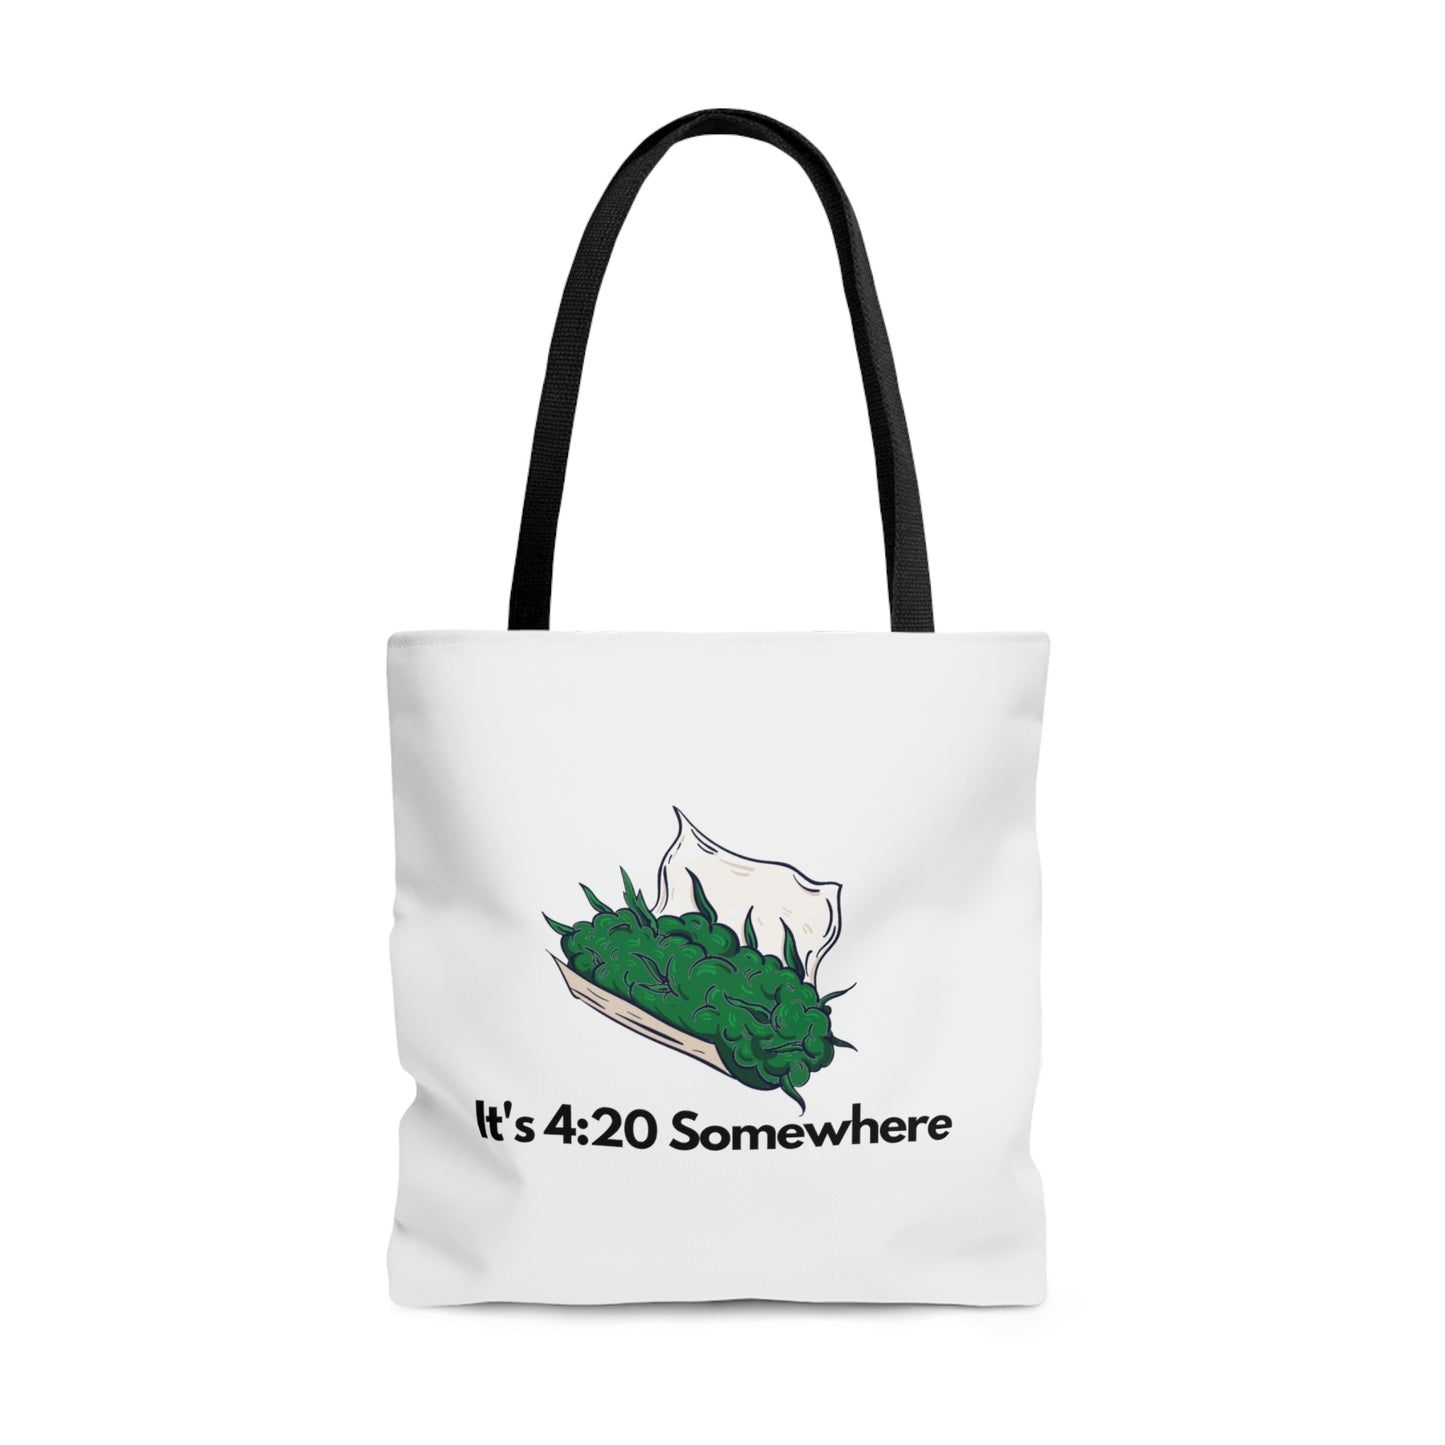 A white tote bag adorned with a vibrant green cannabis joint illustration, preparing to be rolled, accompanied by the cheeky phrase 'It's 420 Somewhere'